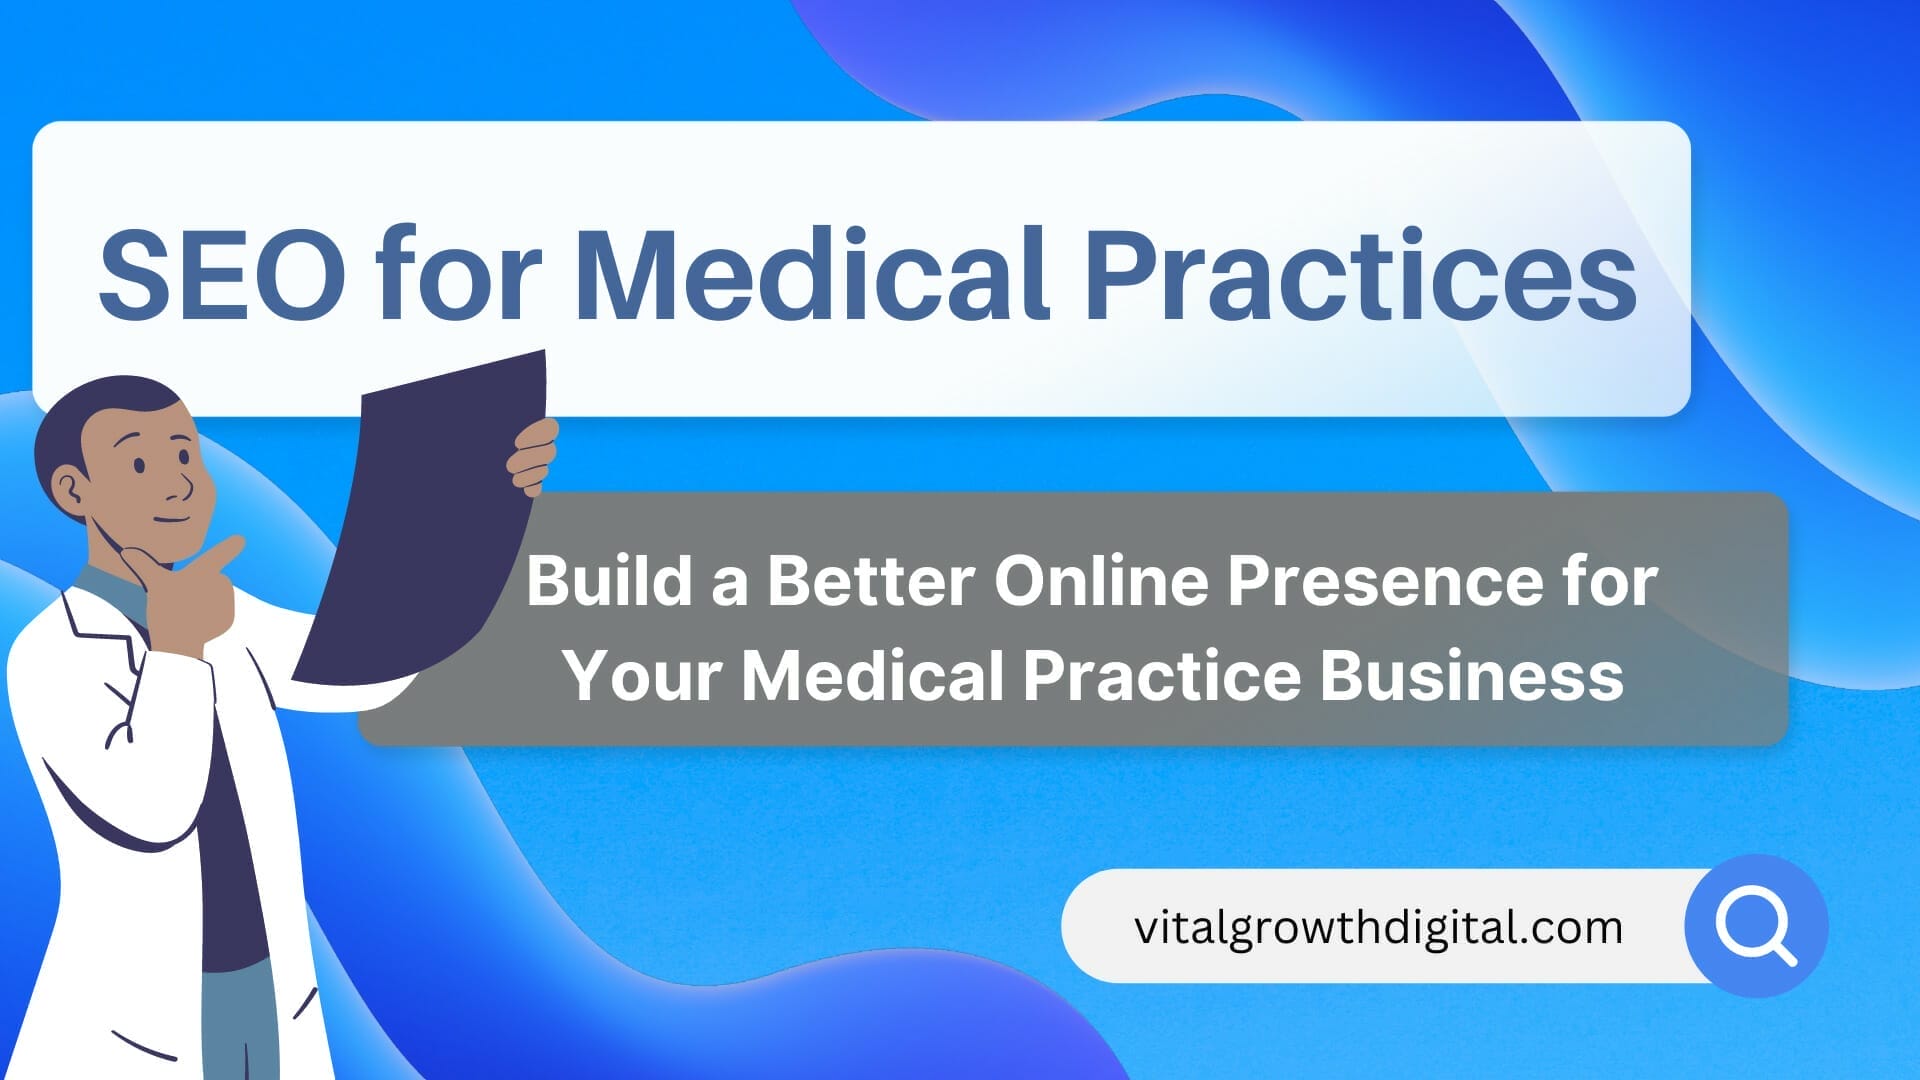 seo for medical practices blog guide